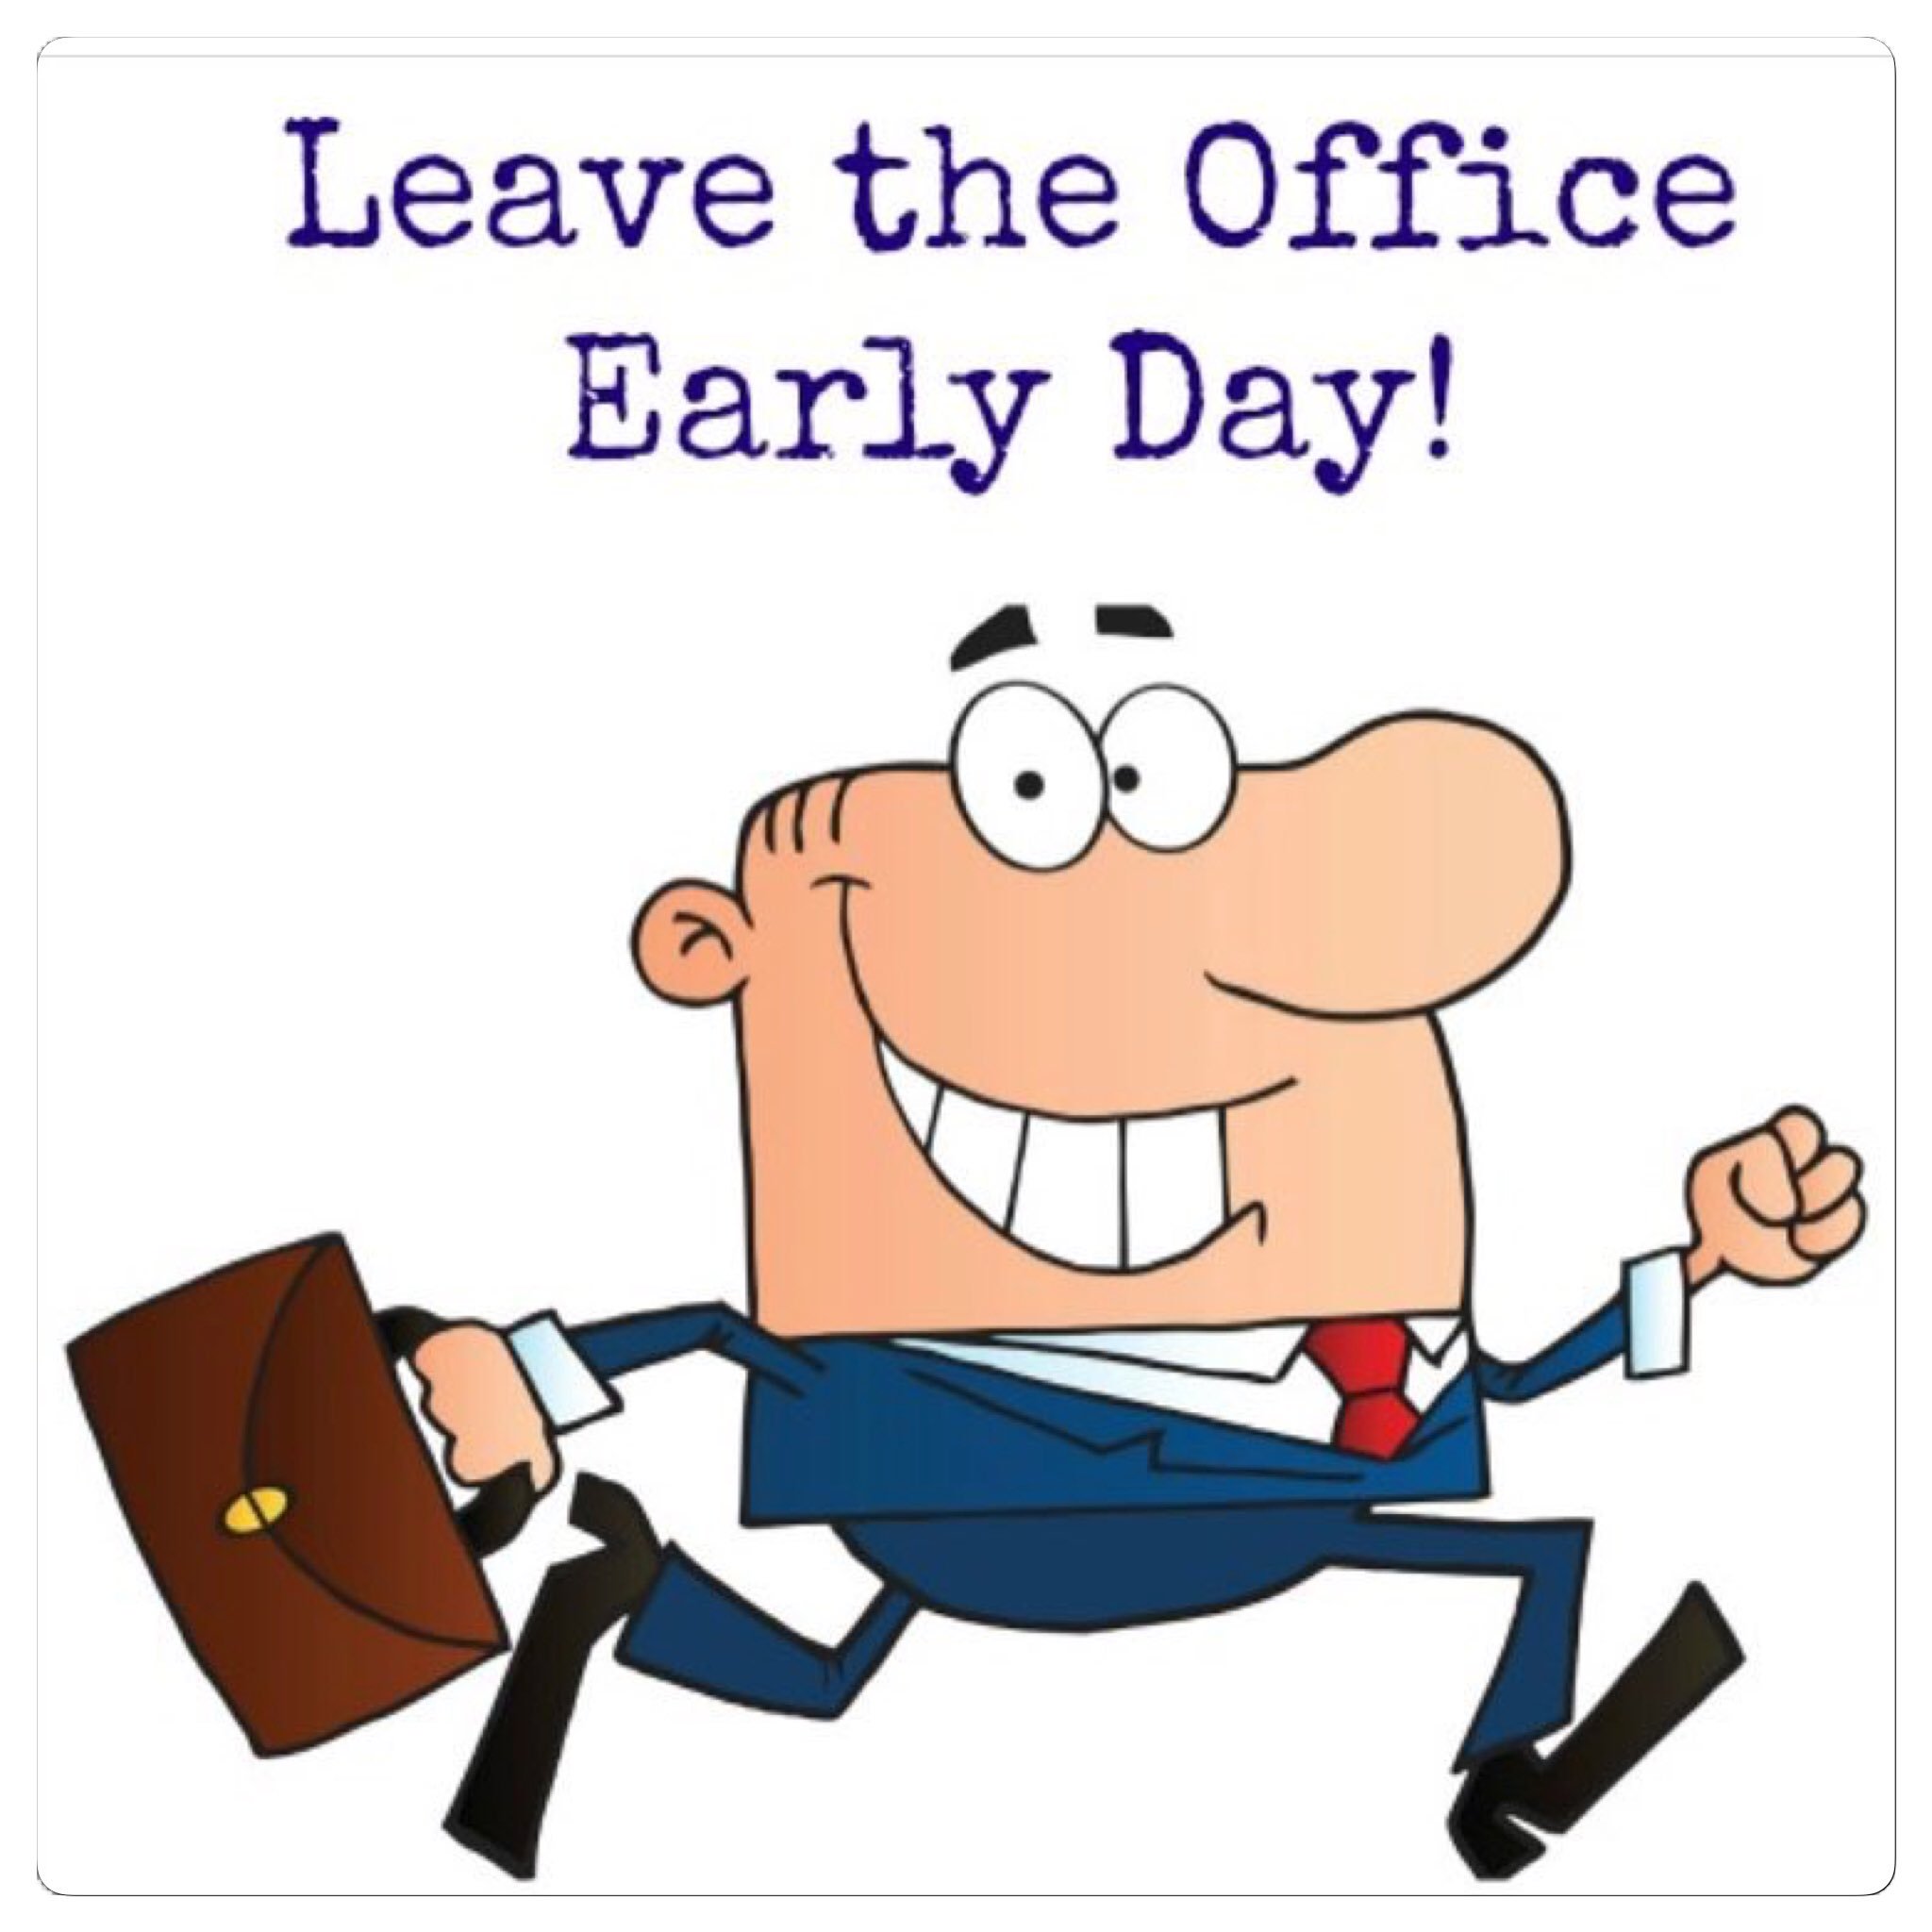 Ethel's Lounge on Twitter "Happy National Leave The Office Early Day